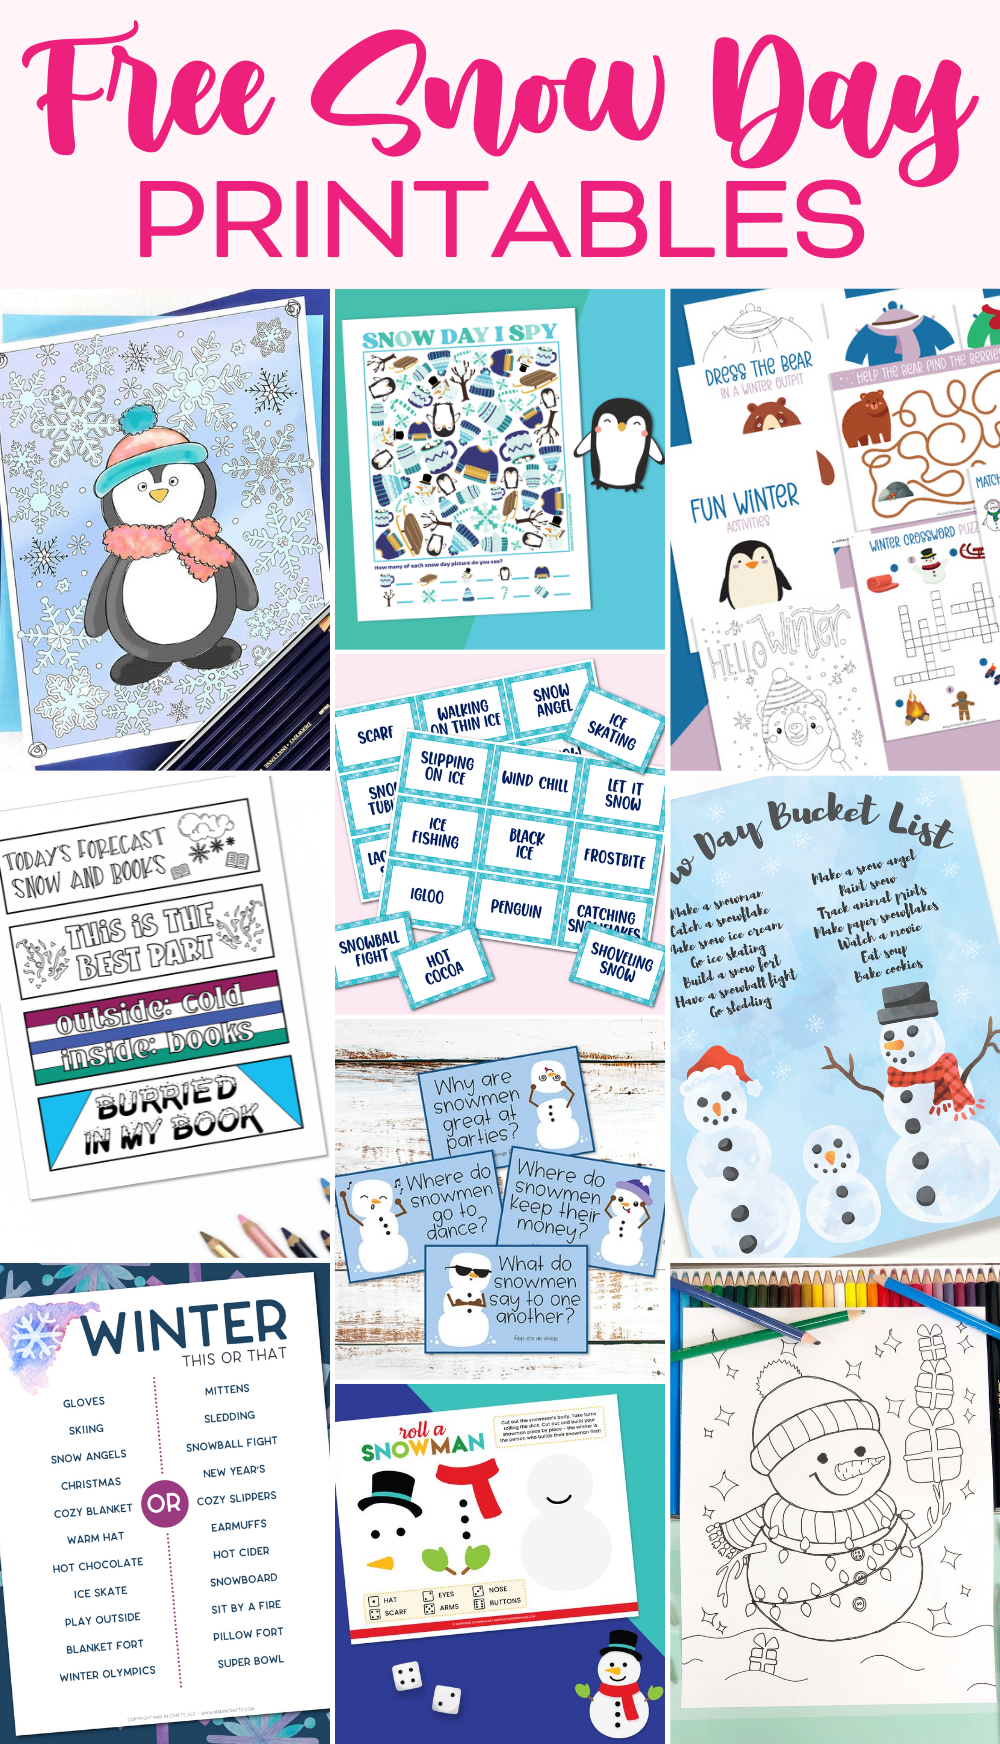 Snow Day Printable Collection - Winter themed printables perfect for snow days.